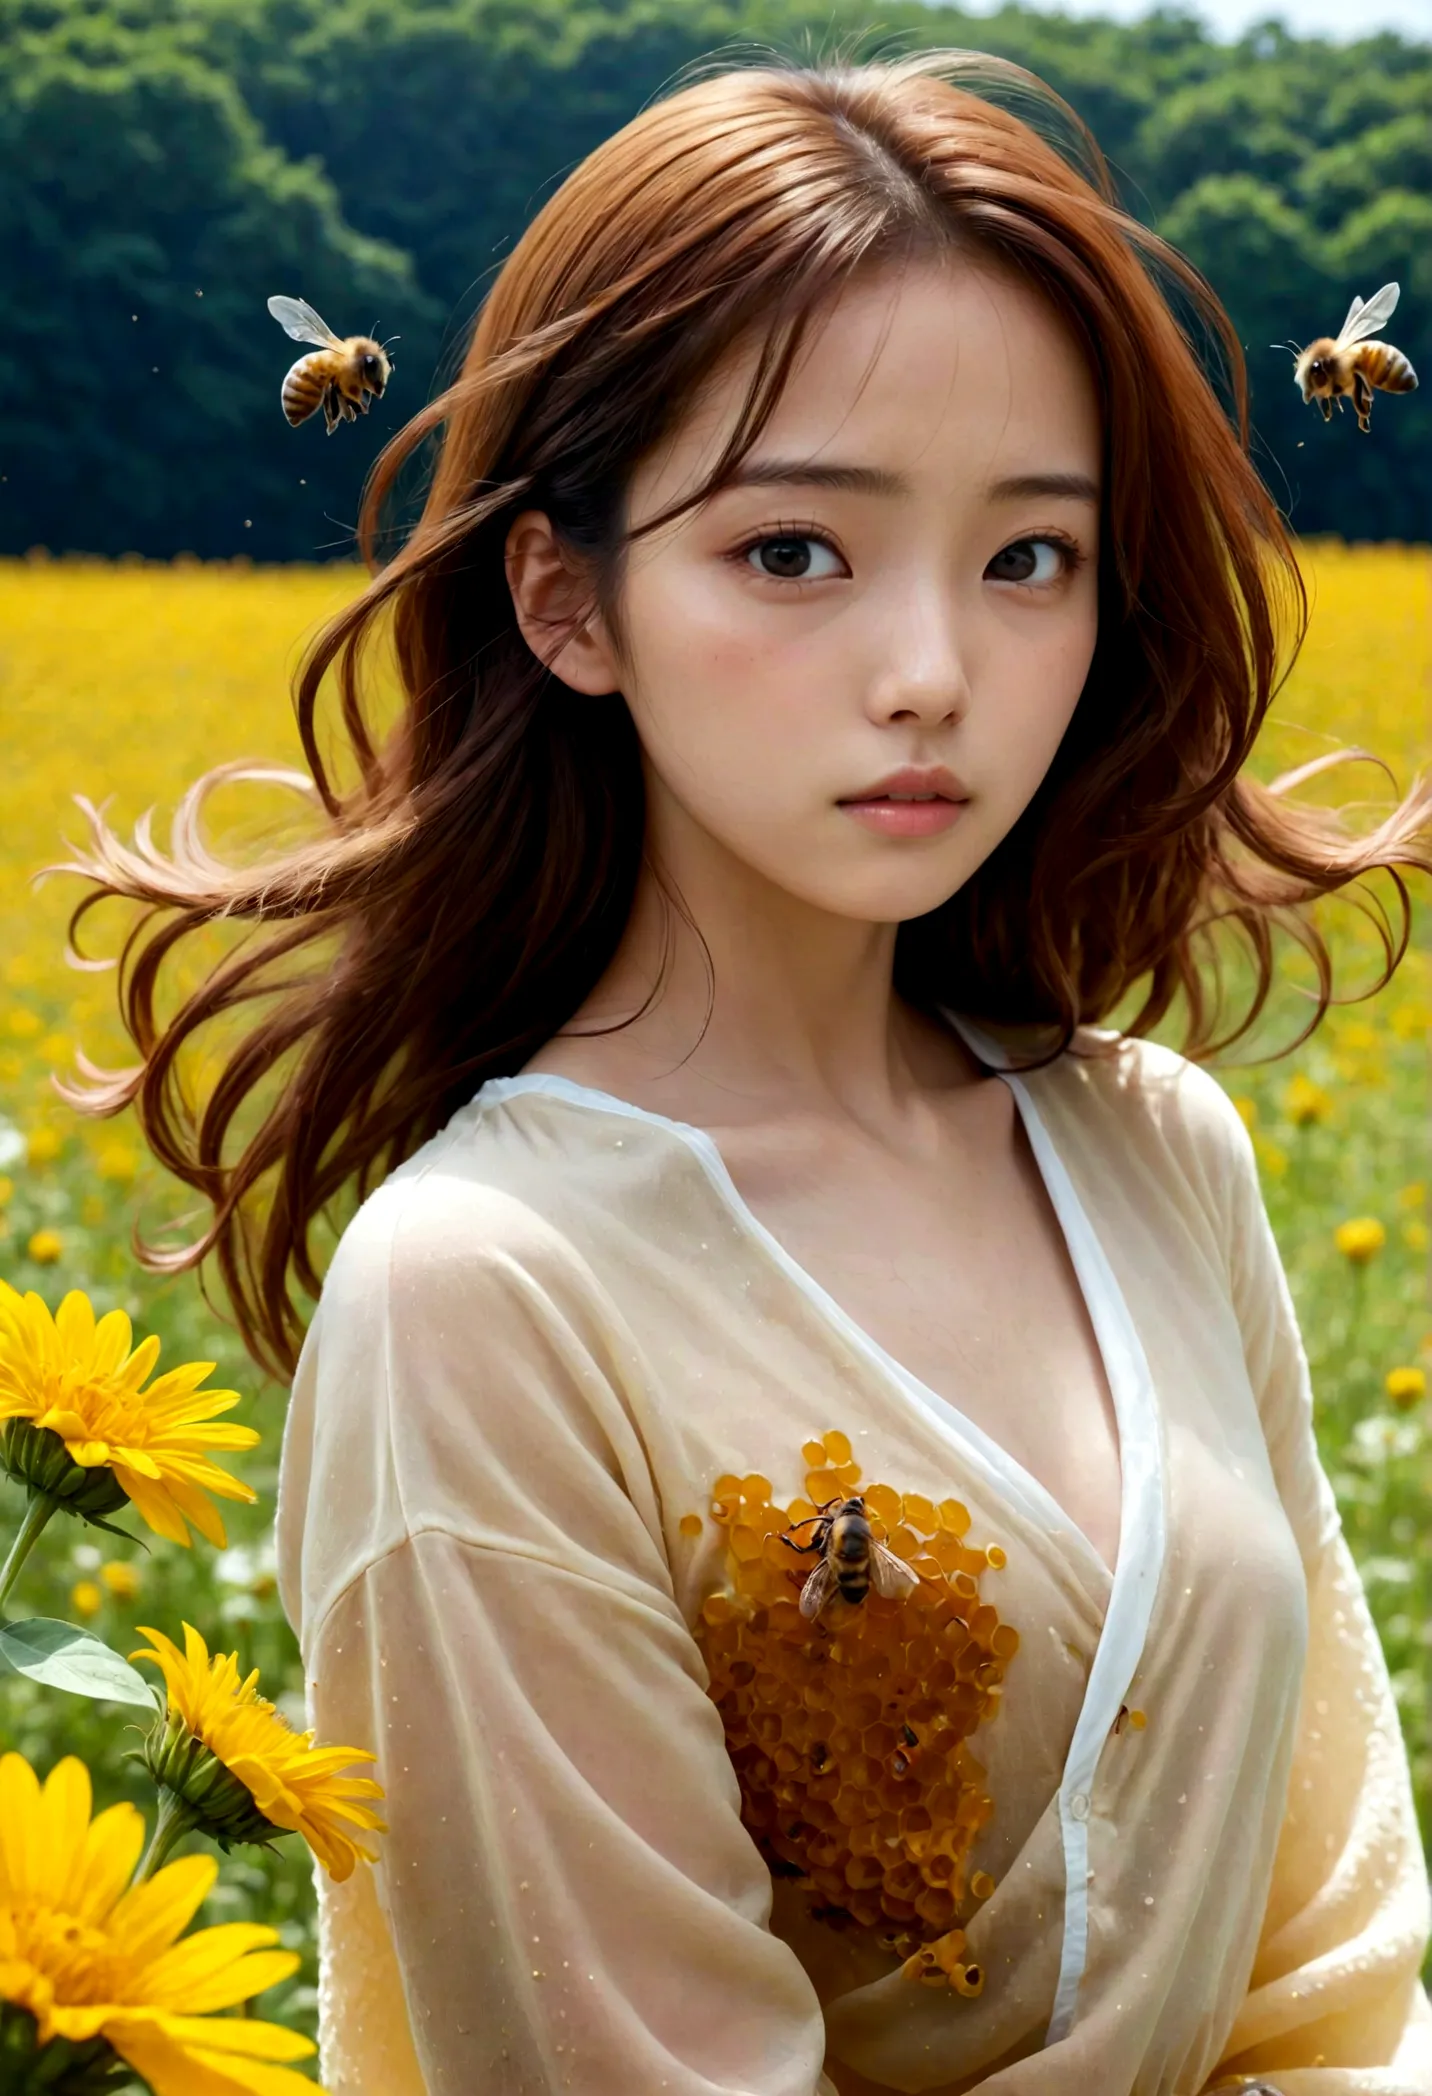 Girl covered in honey、whole body、Bees are flying、Flower Field、Beautiful Nature